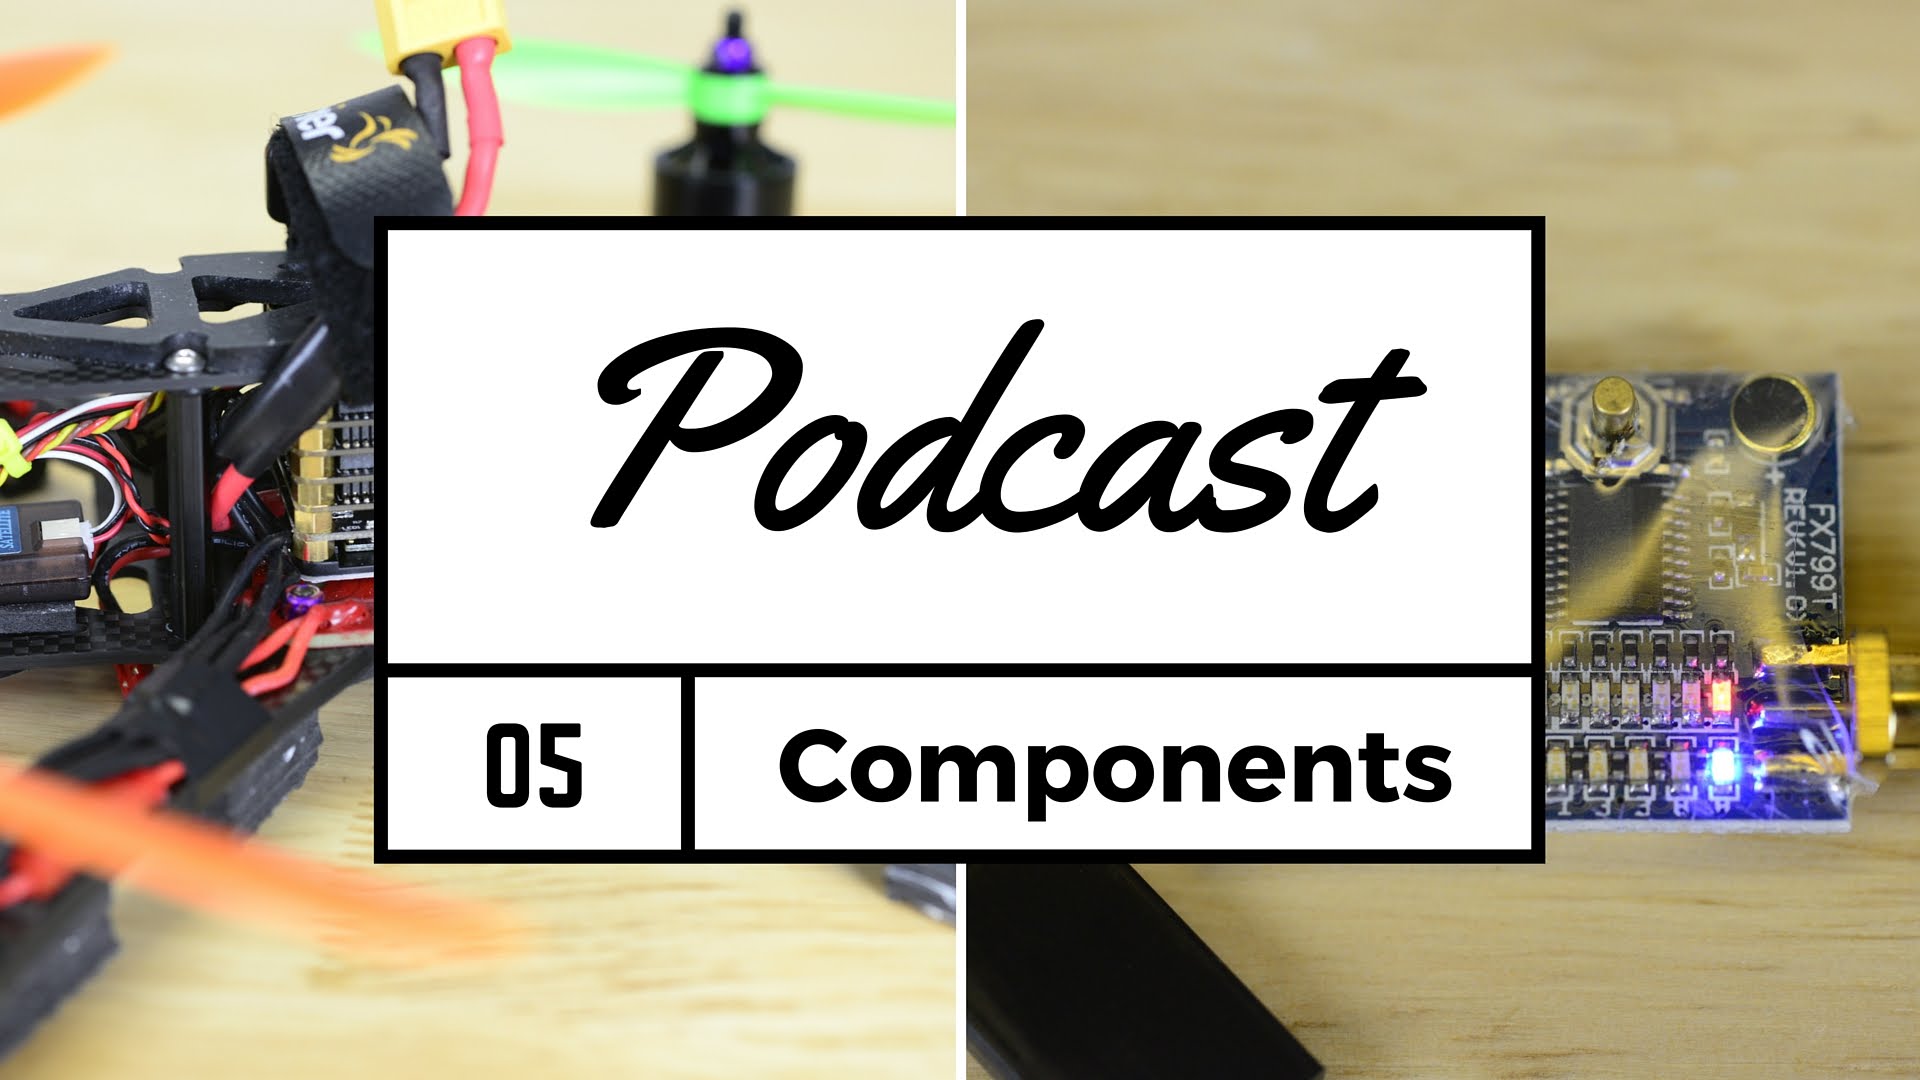 FPV Podcast 5 – Intro to components to build a quadcopter – Part 1 of 2